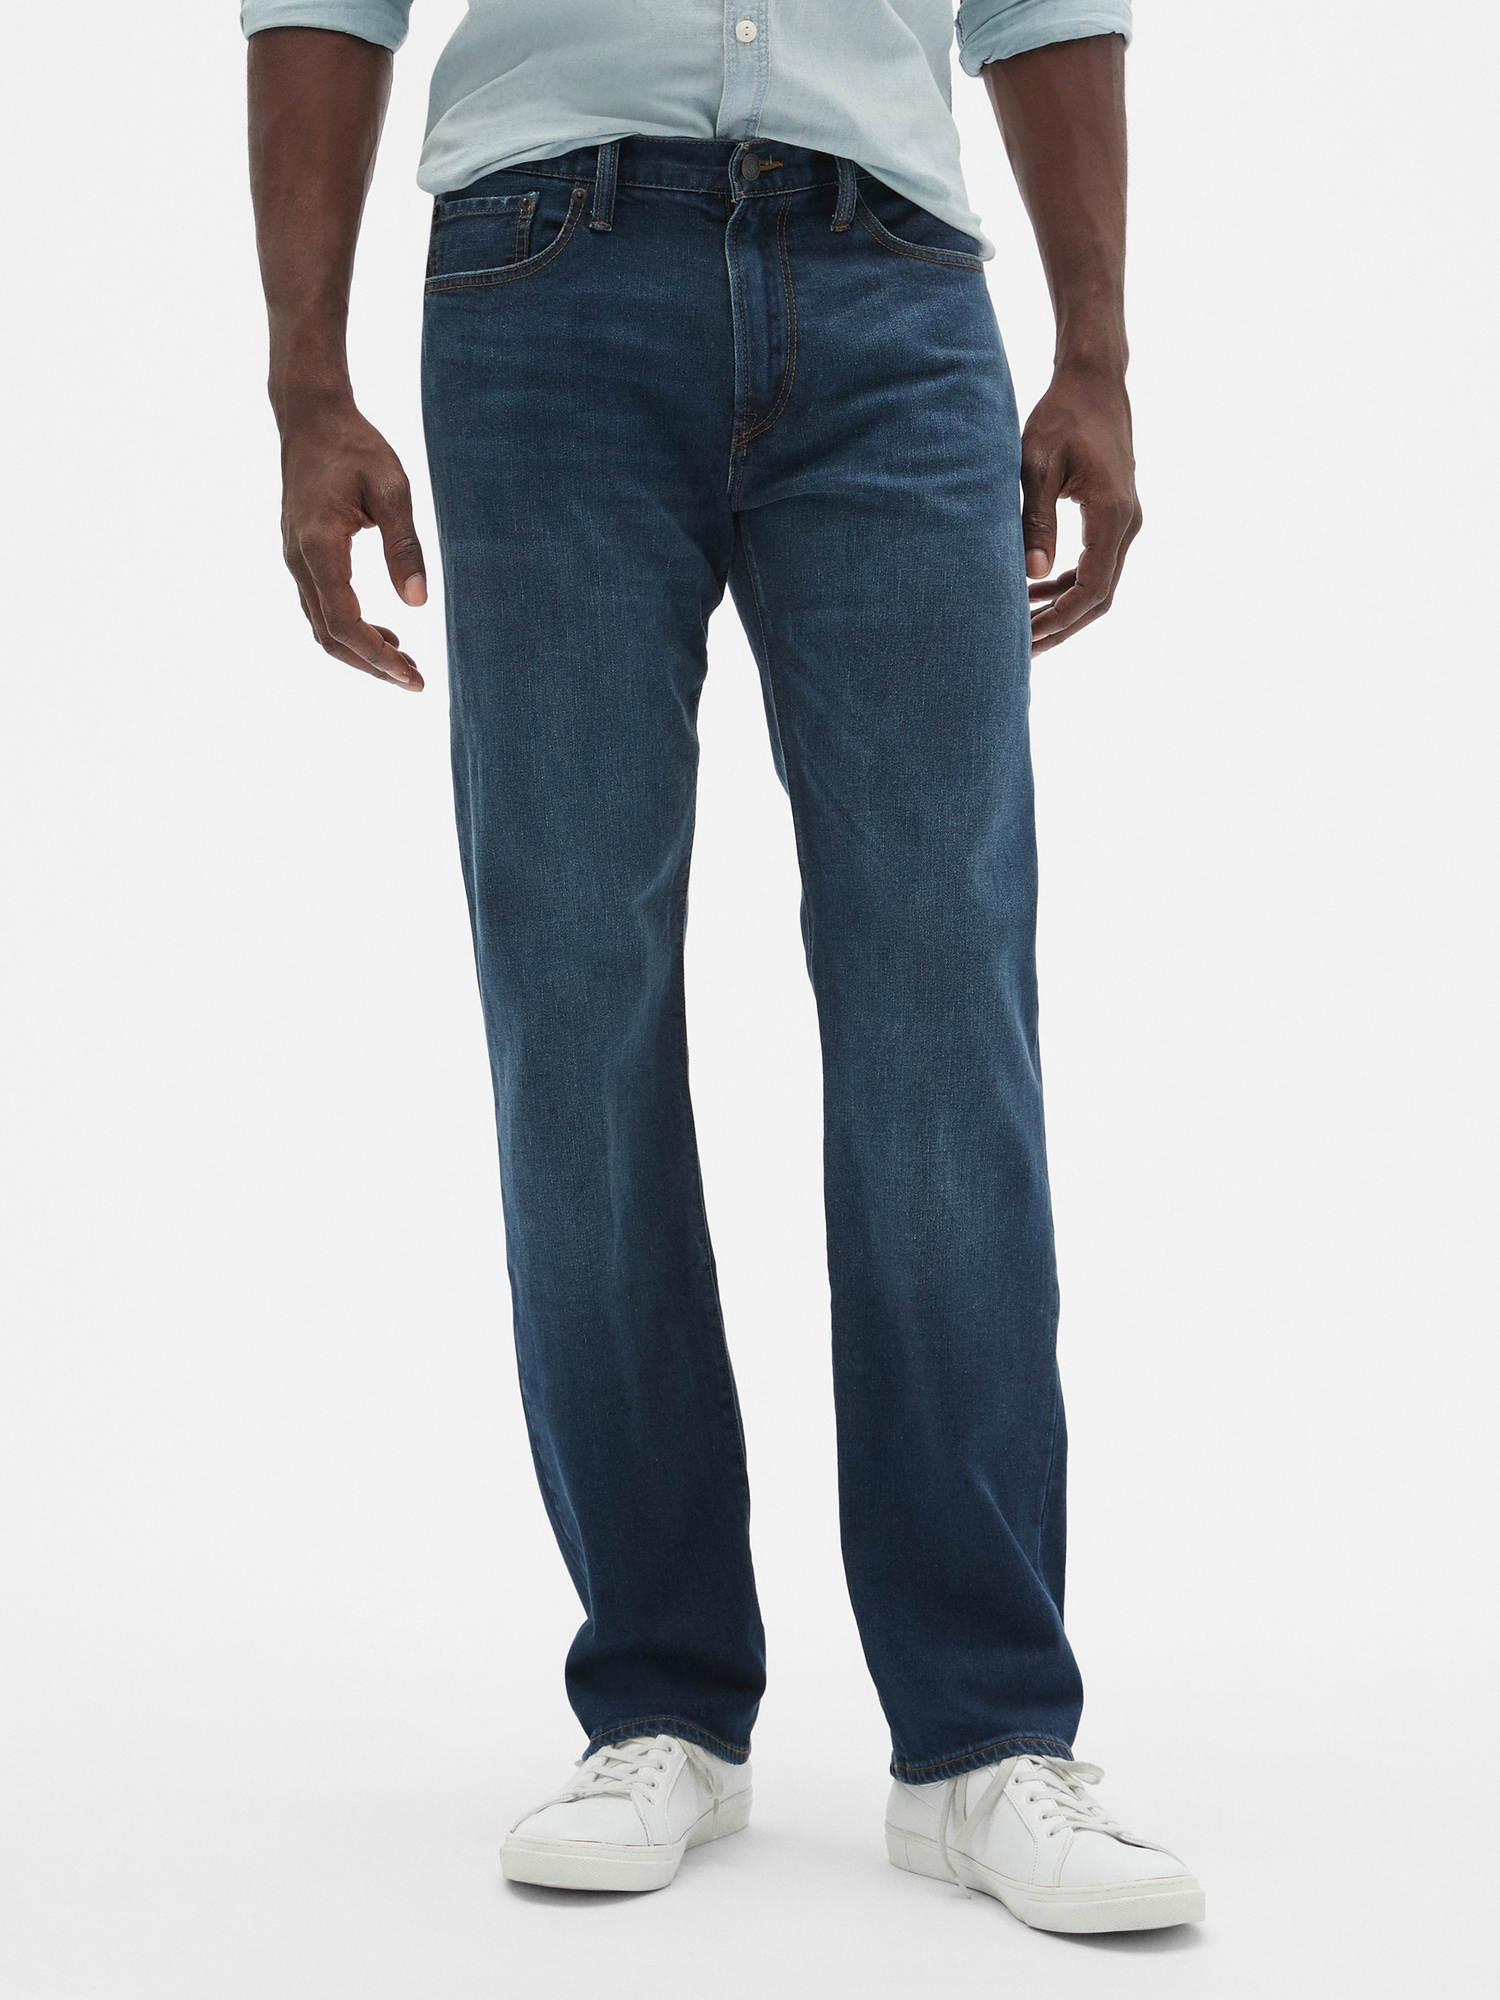 Straight Gapflex Jeans with Washwell™